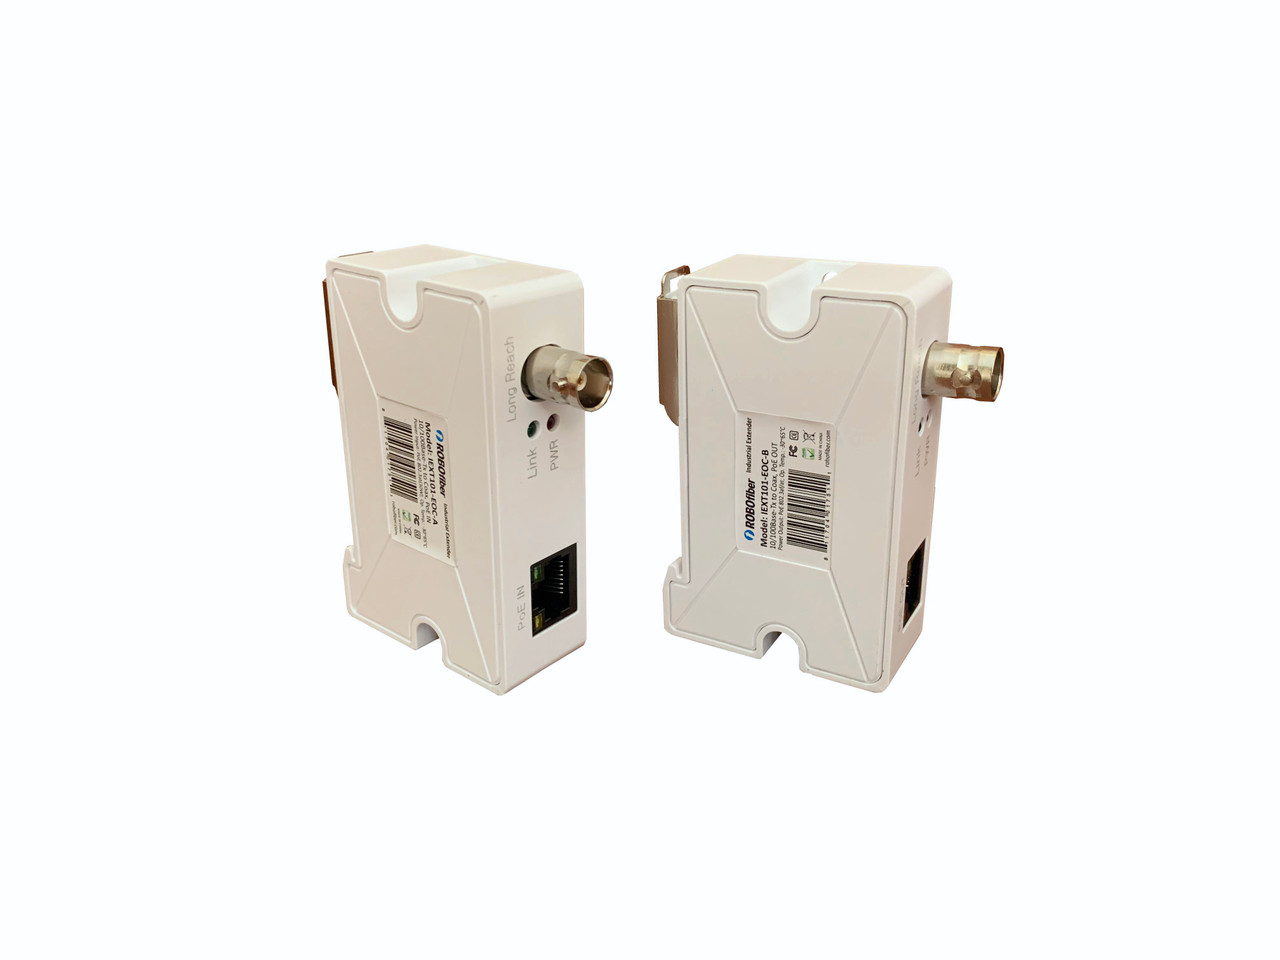 IEXT101-EOC - Ethernet over Coax LAN Extender, PoE powered device, up to  800m reach and transport